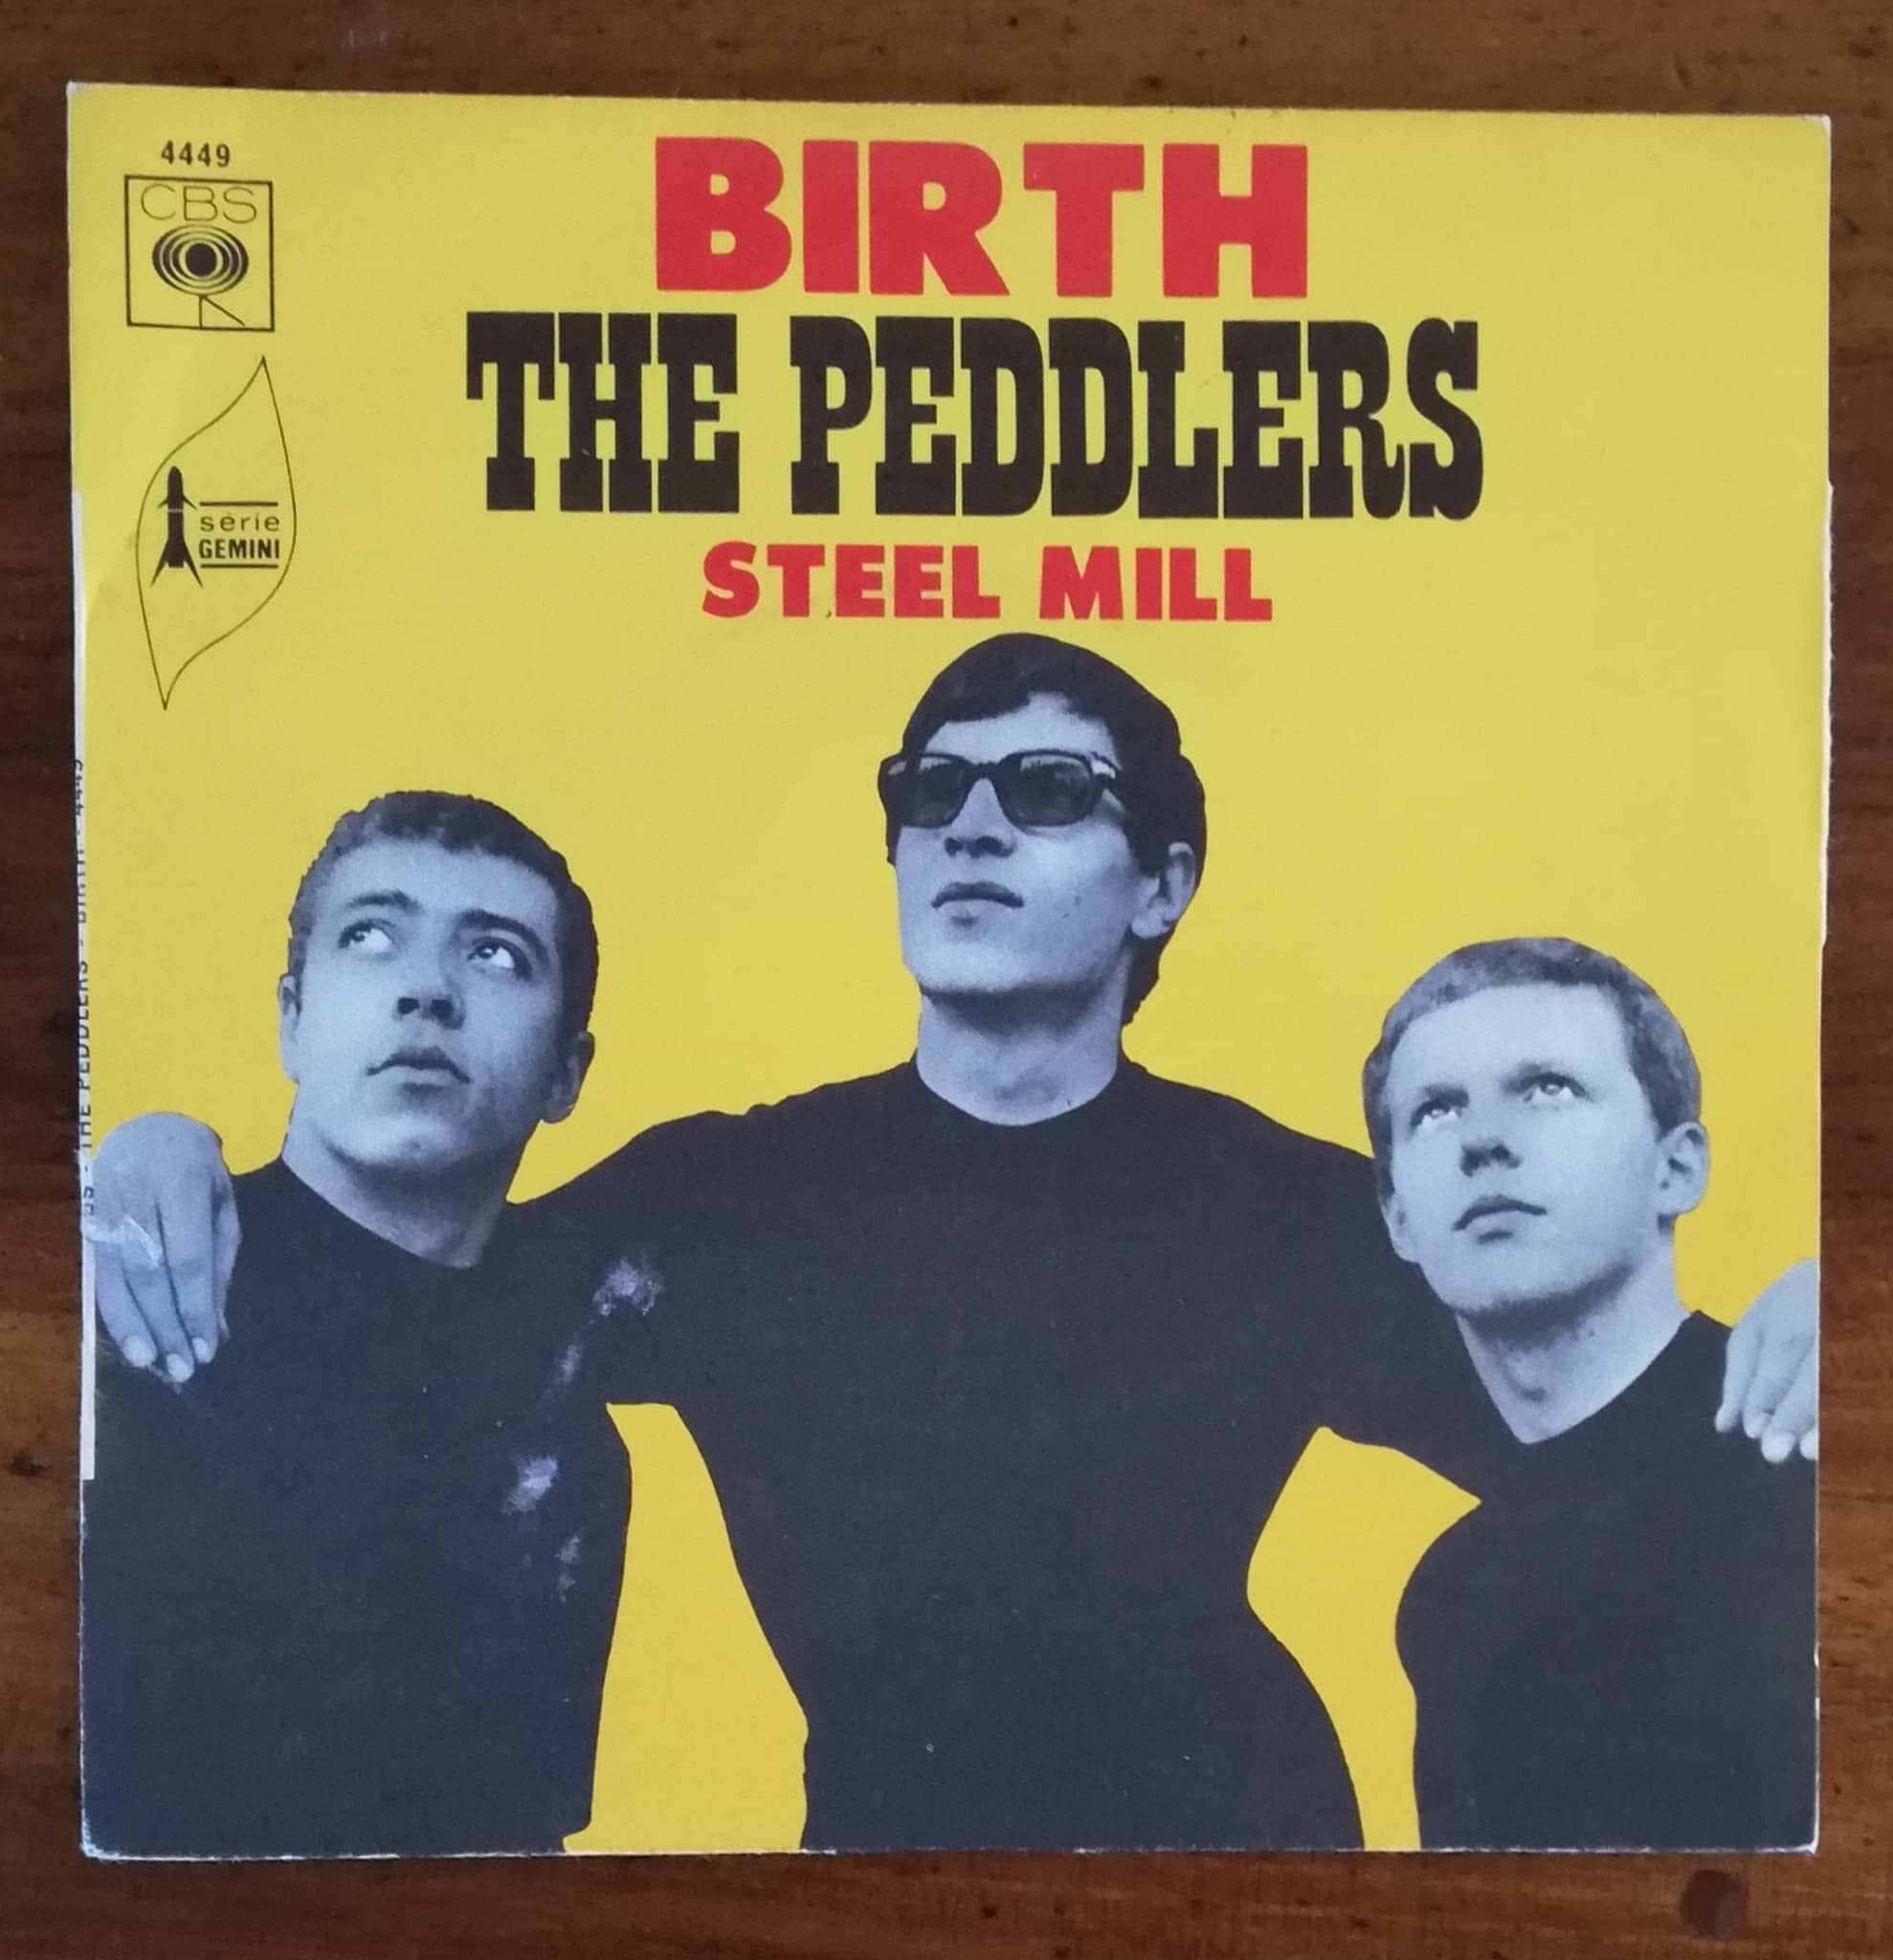 The Peddlers : Birth, 7" PS, France, 1969 - 10 €